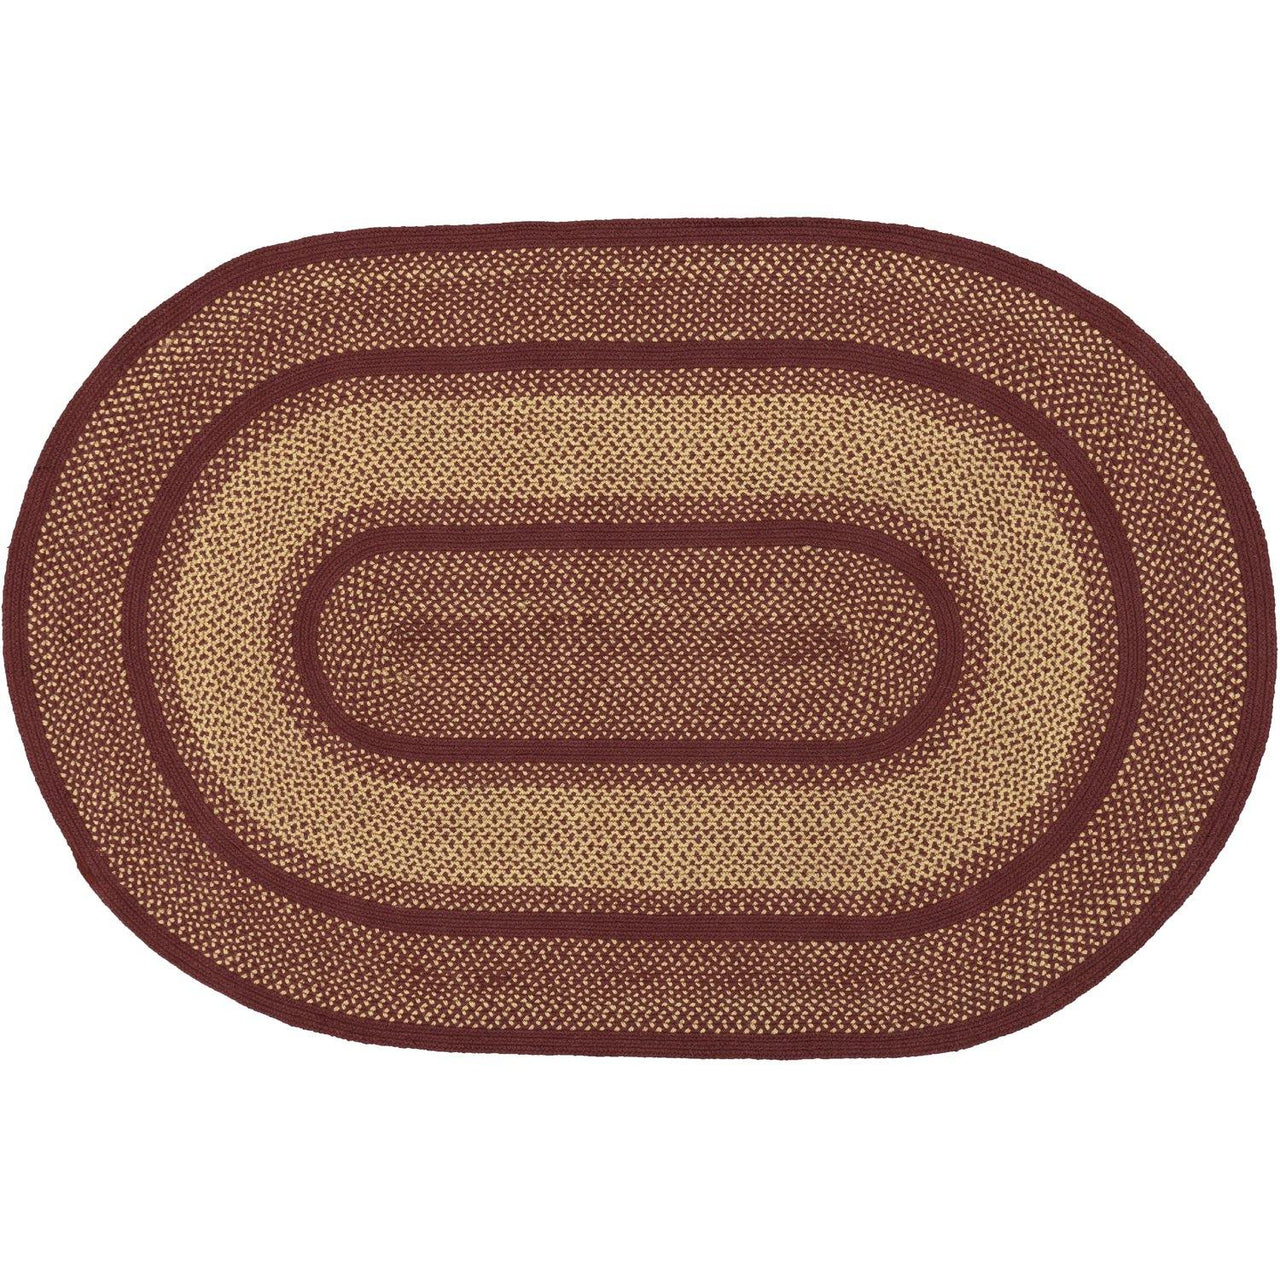 Burgundy Red Primitive Jute Braided Rug Oval 4'x6' with Rug Pad VHC Brands - The Fox Decor